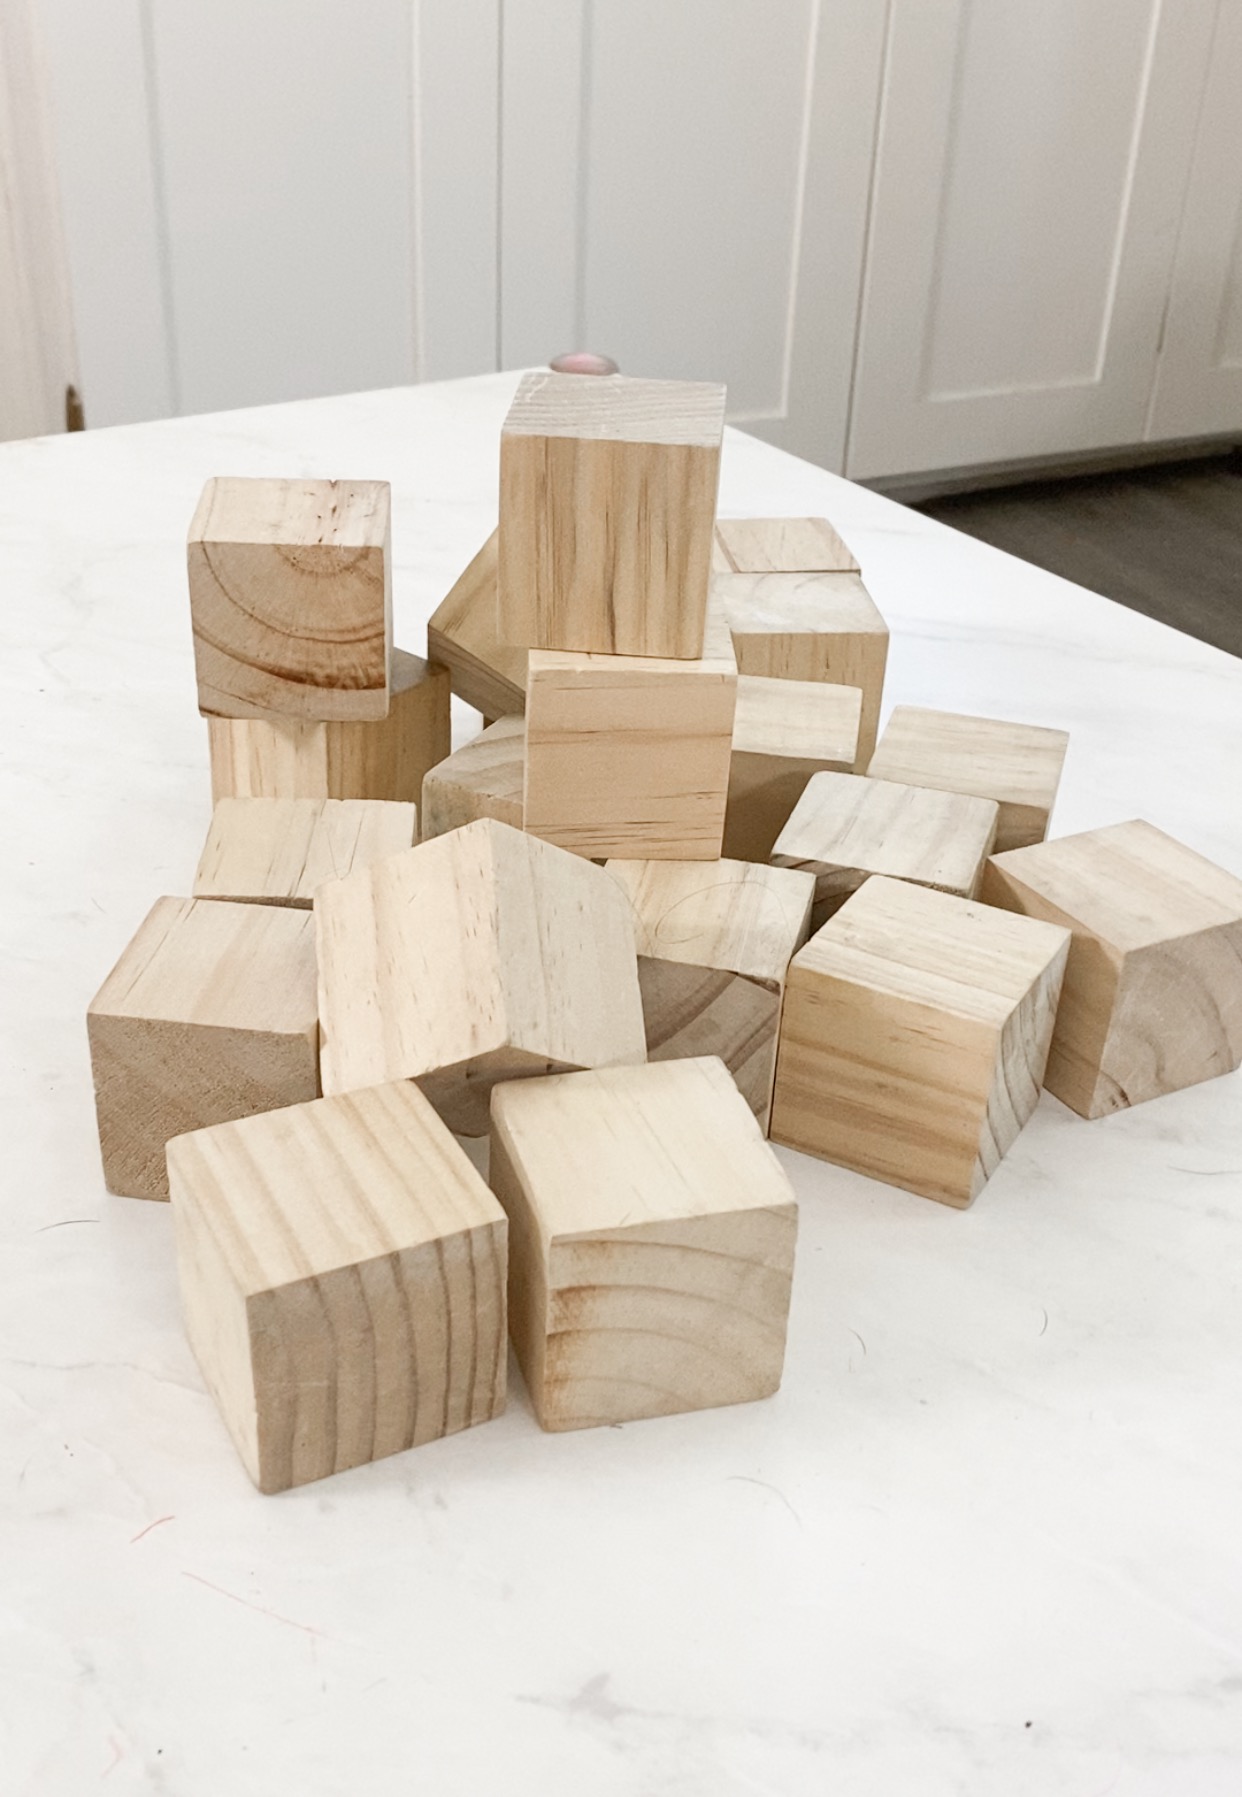 How to Make Wooden Blocks